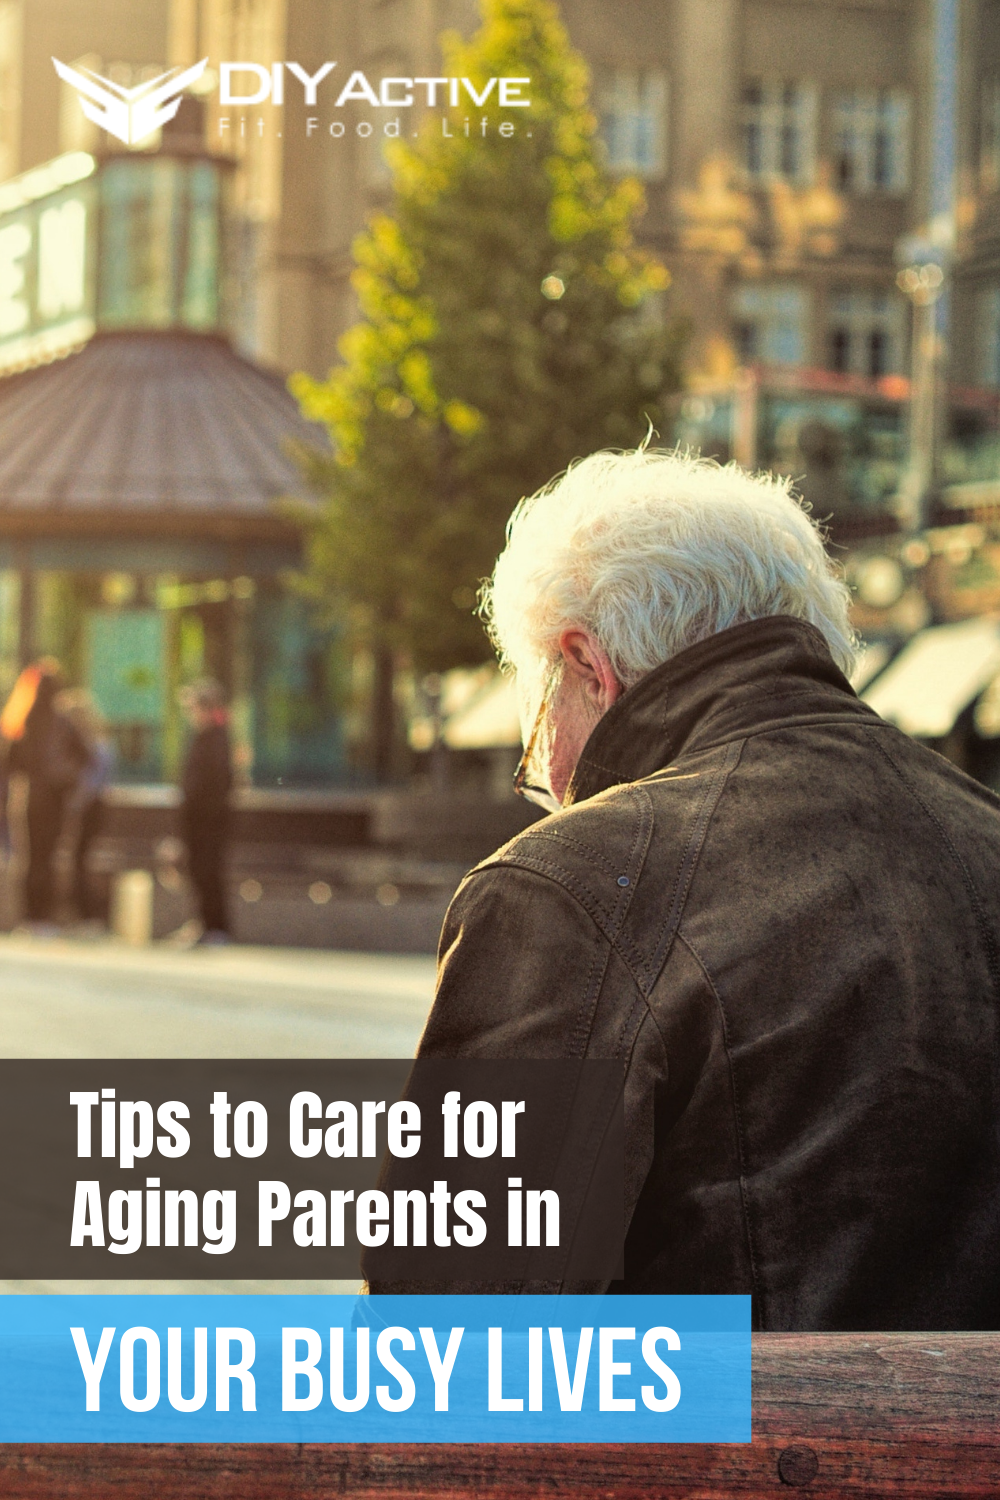 Tips to Care for Aging Parents in Your Busy Lives